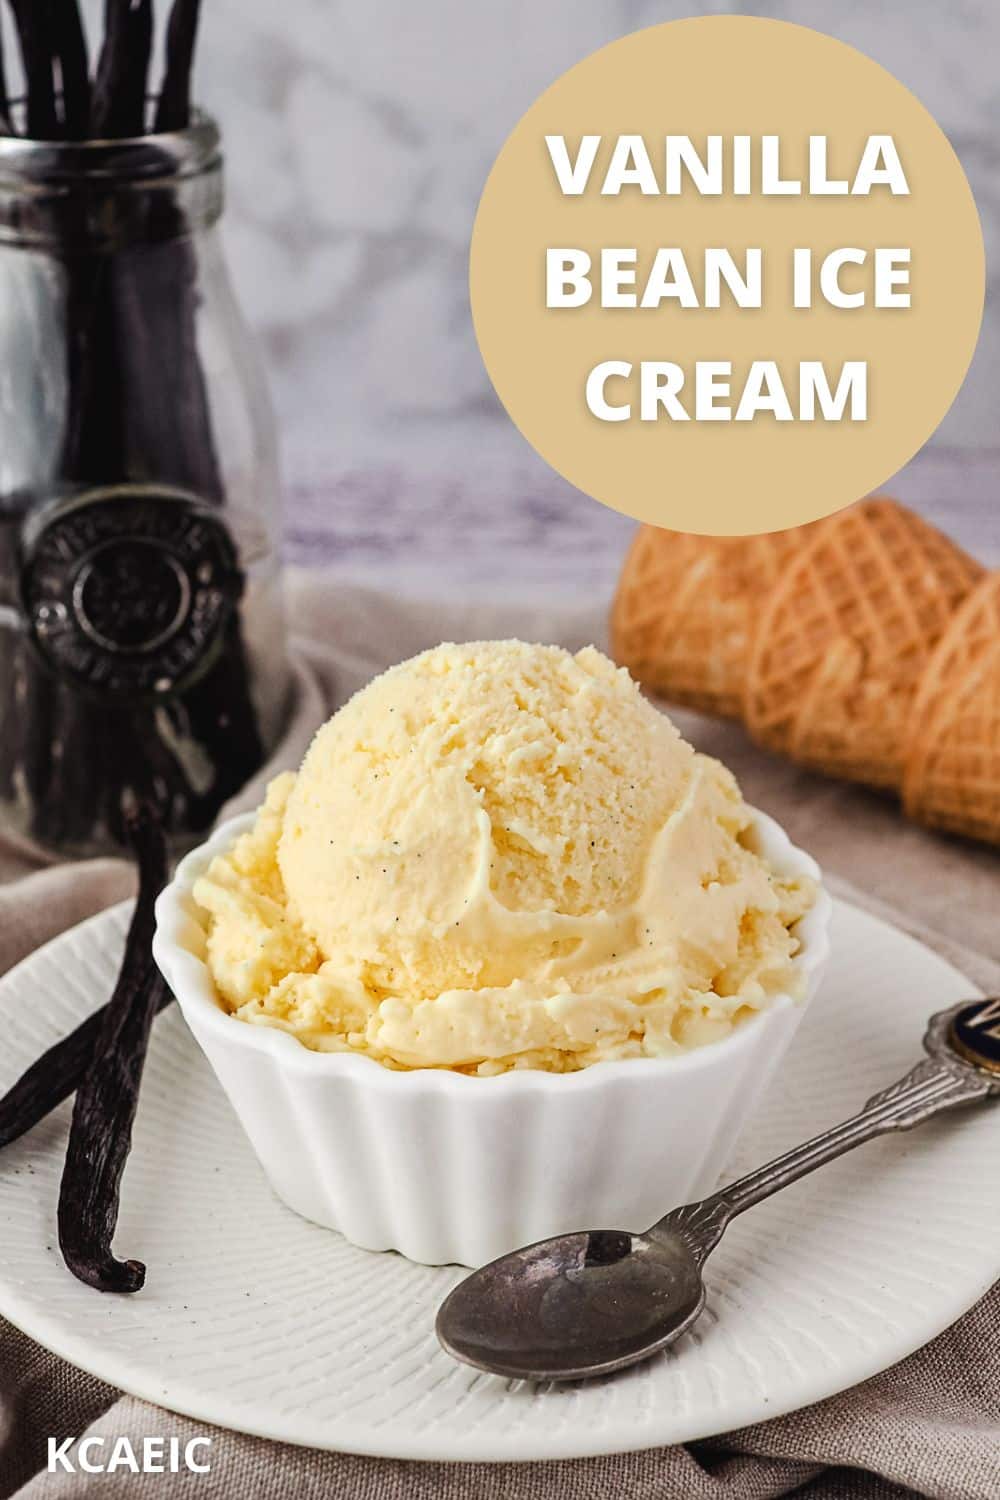 Scoop of ice cream in a bowl, with vanilla beans and spoon on the side and ice cream cones in background, with text overlay.